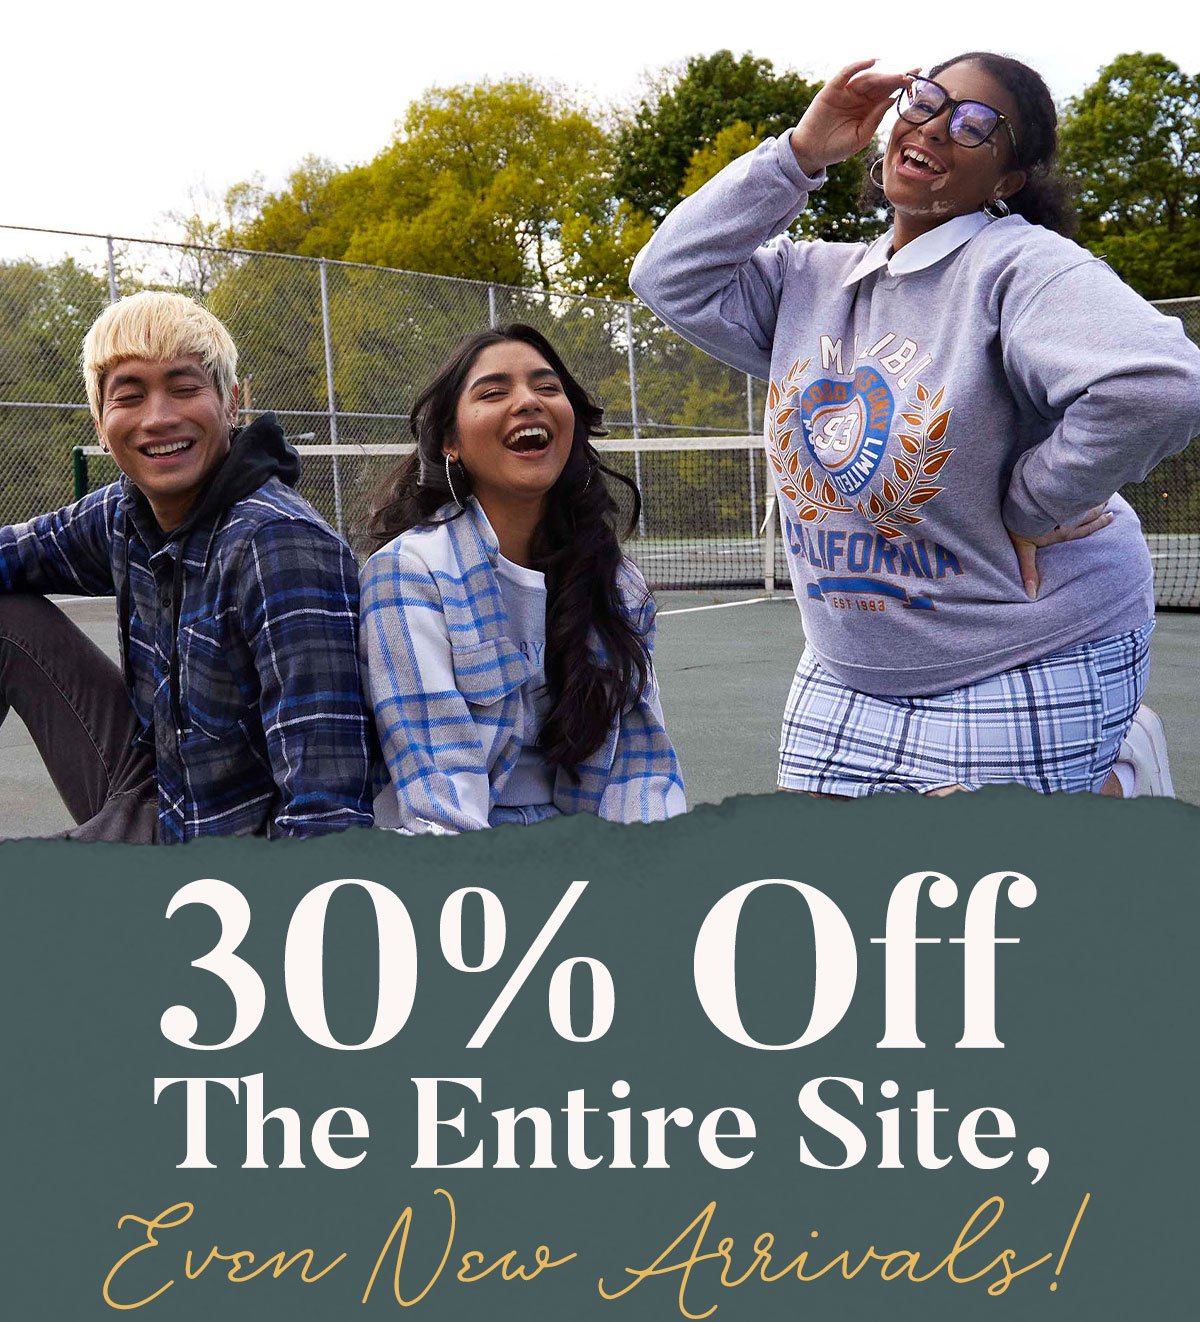 30% off the entire site, even new arrivals